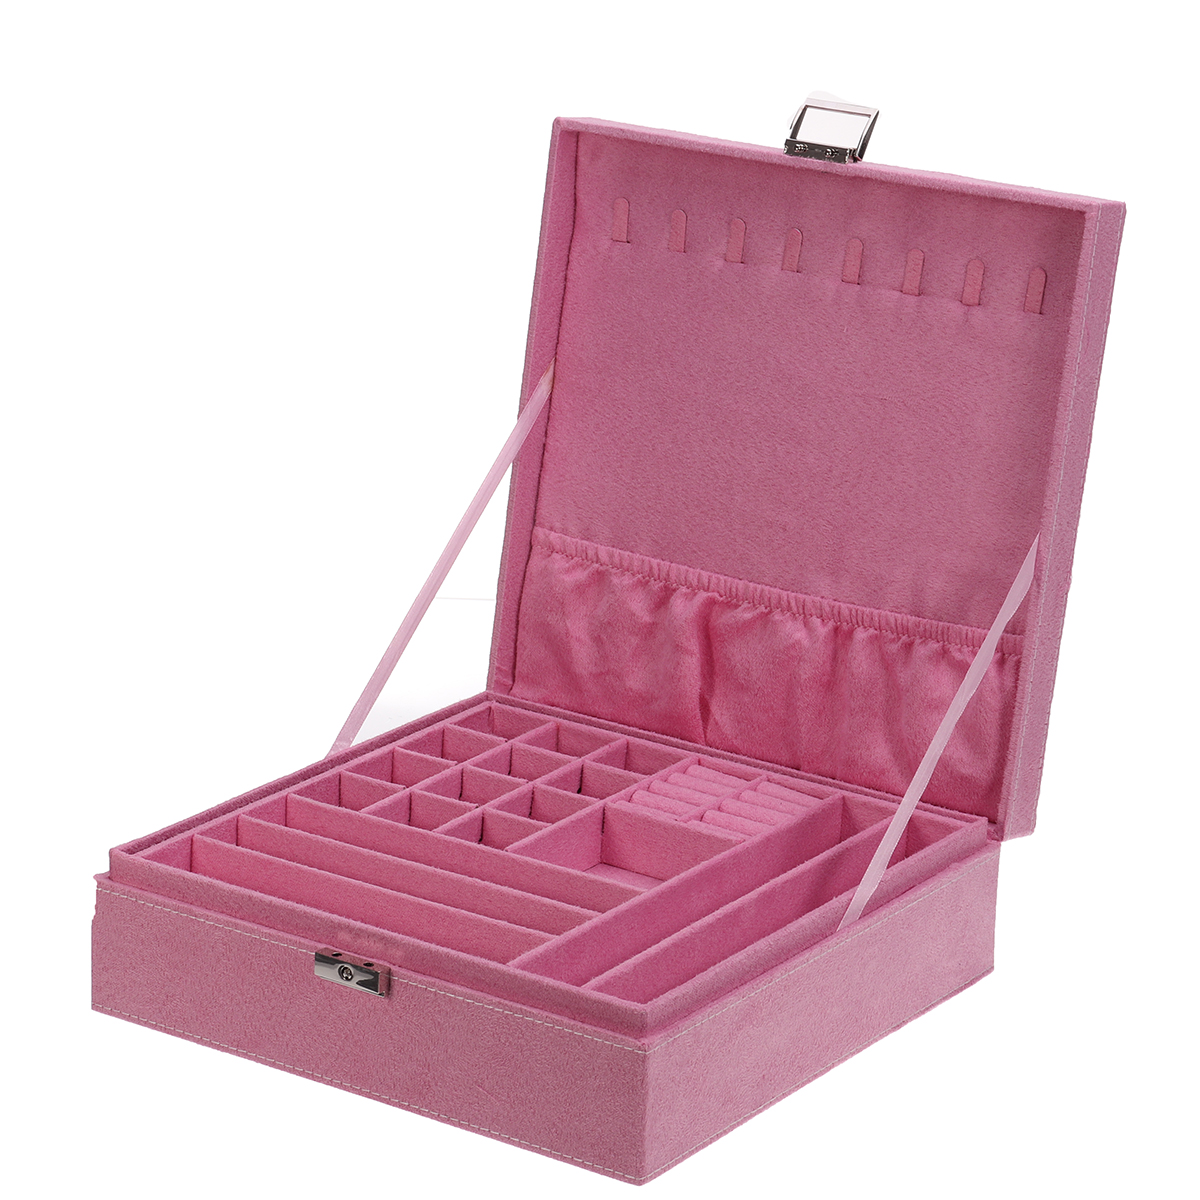 Multi-function-Vintage-Jewelry-Box-Organizers-Two-layer-Lockable-Jewelry-Display-Storage-Case-1855370-25